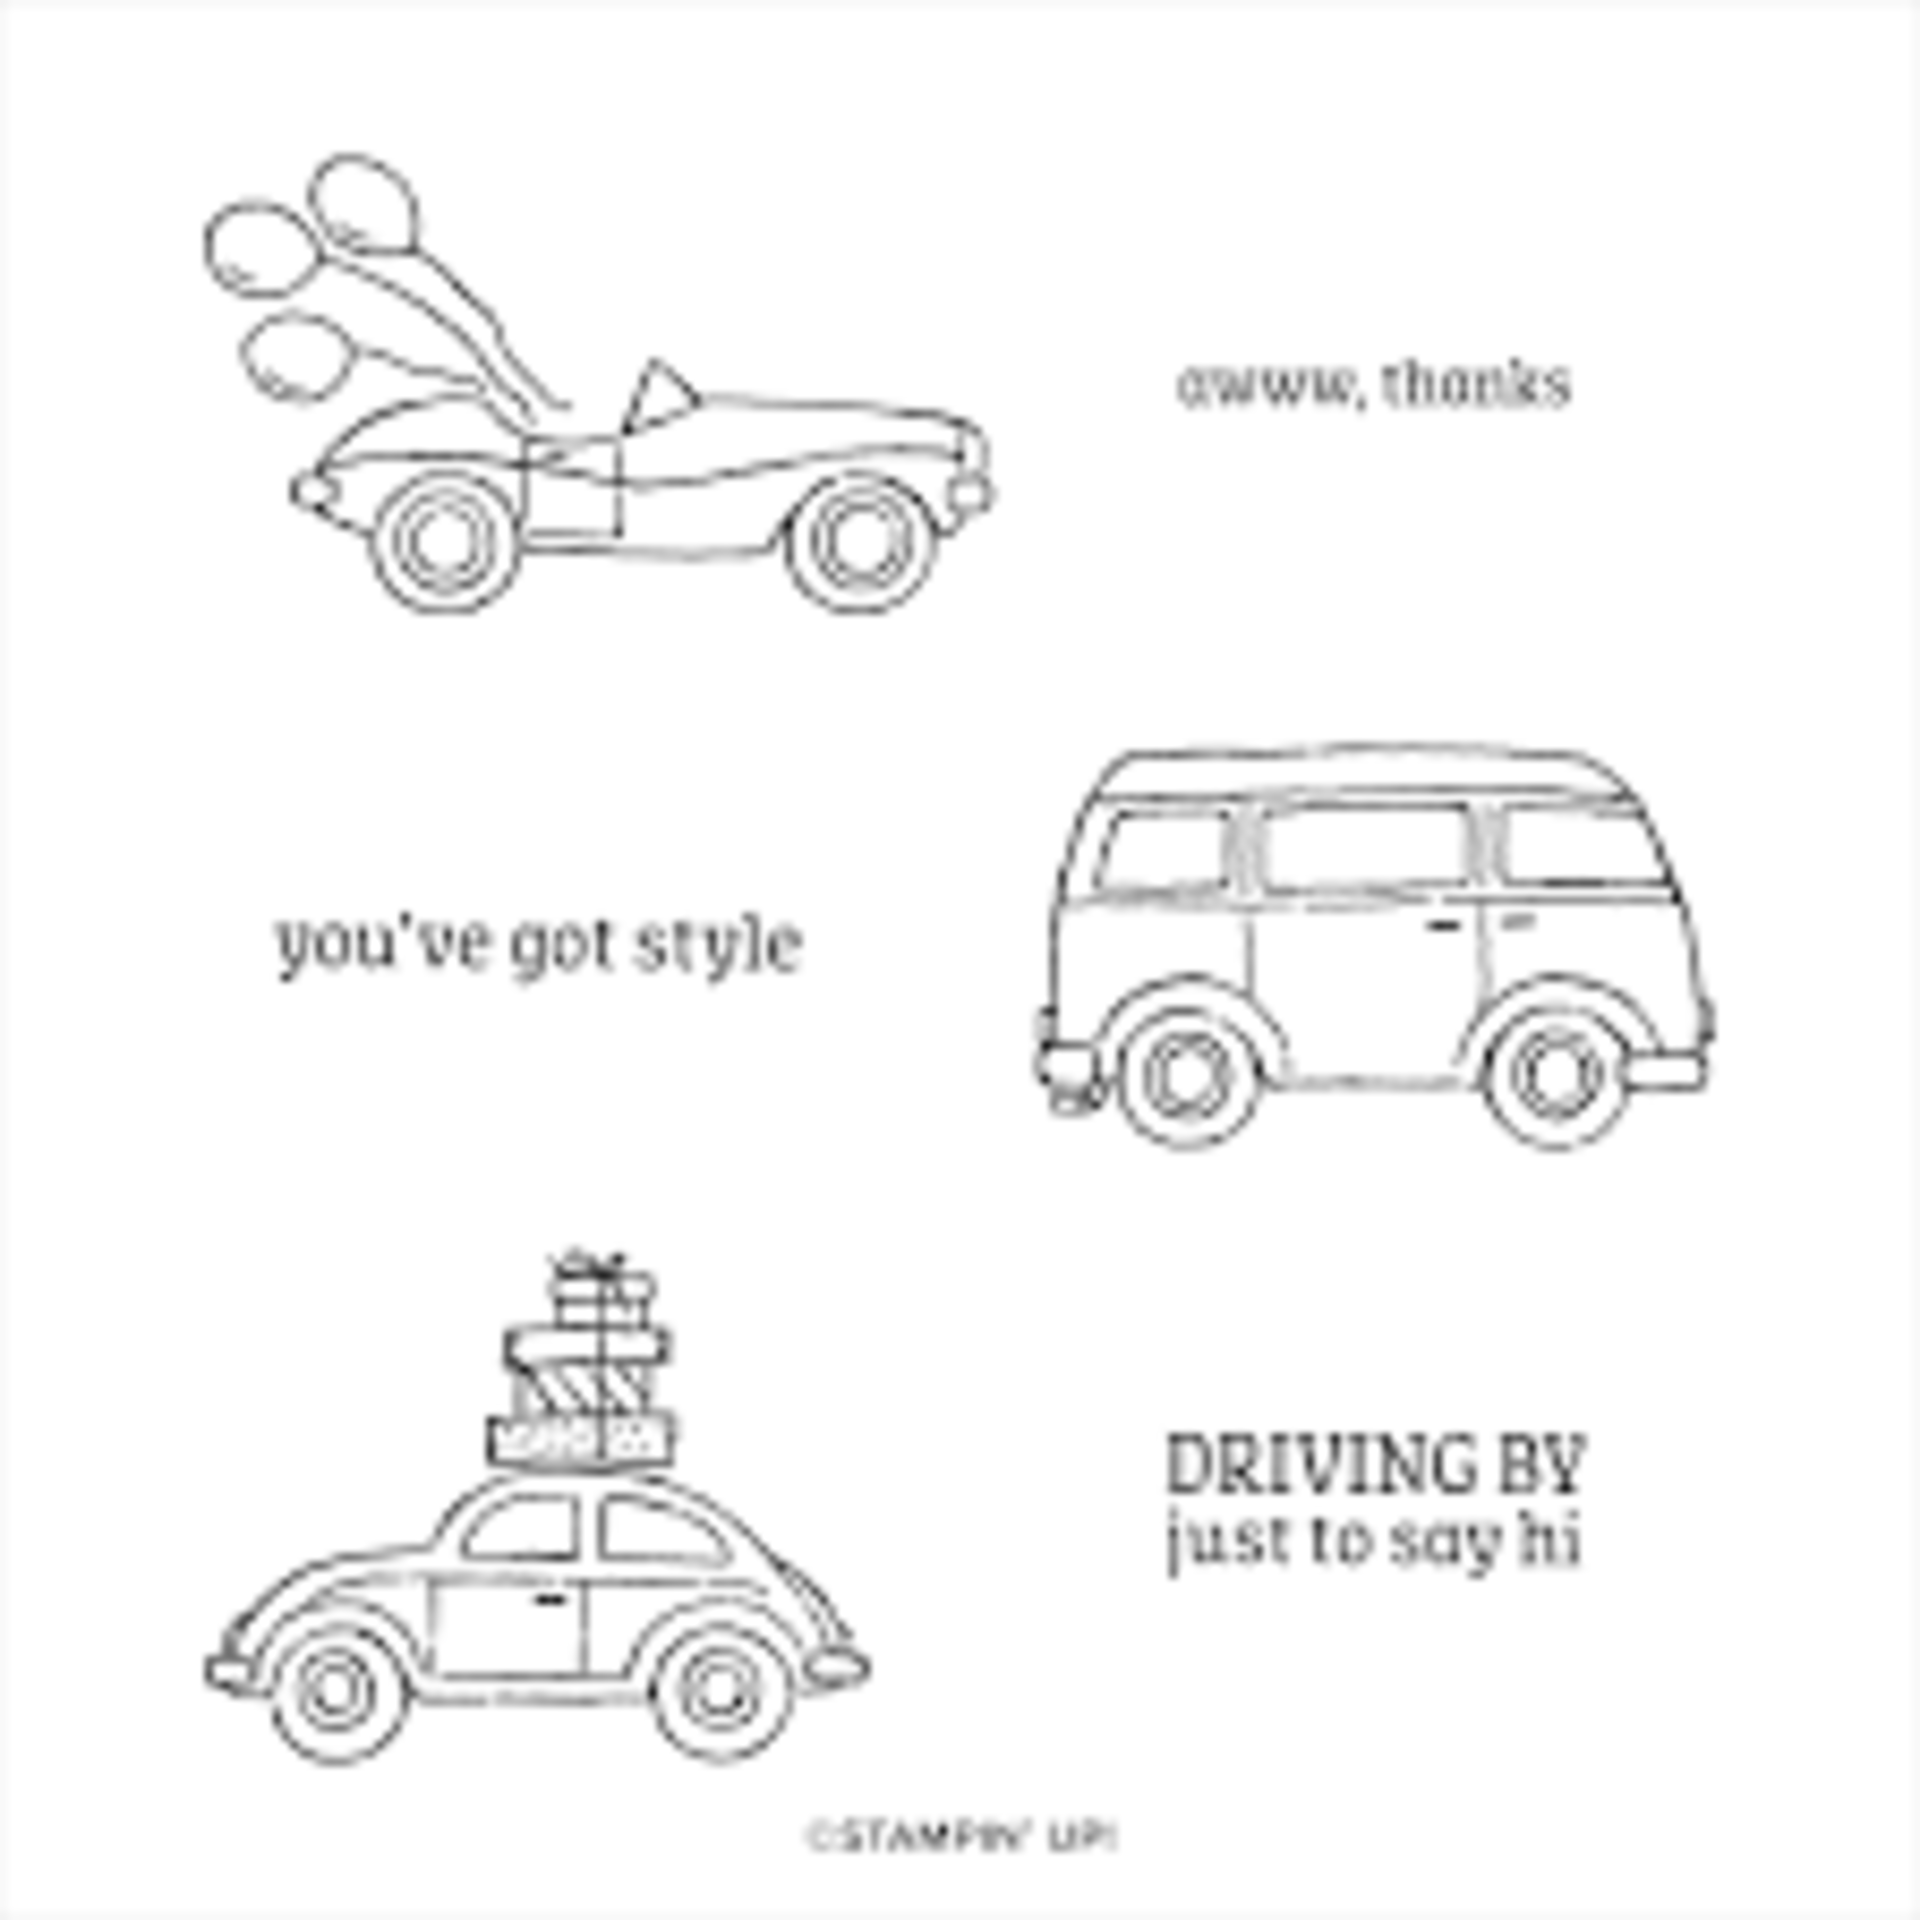 42 X BRAND NEW STAMPIN UP DRIVING BY CLING STAMP SETS RRP £20 EACH R19.3